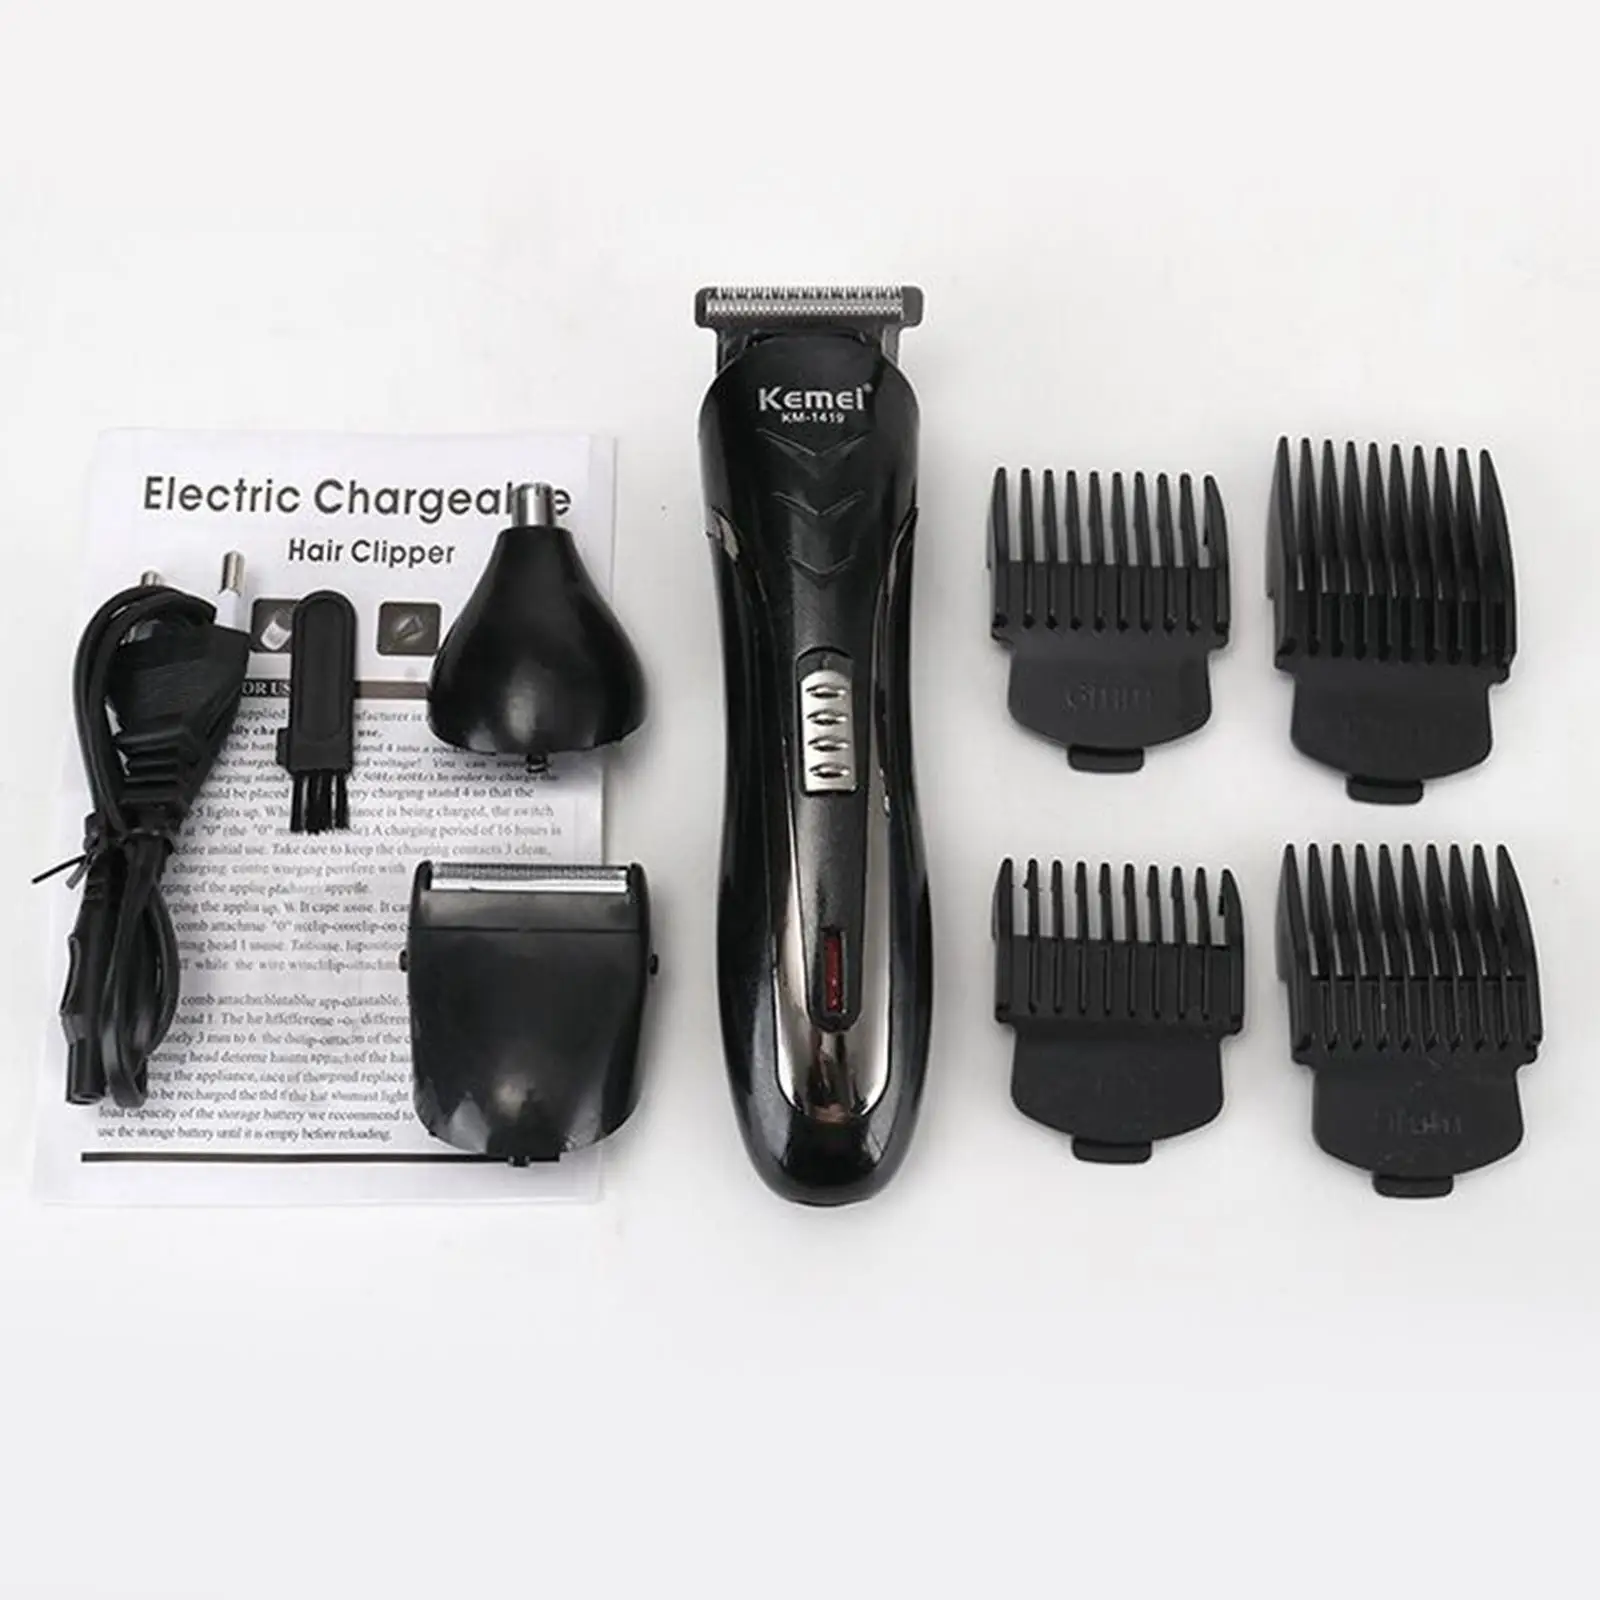 Professional Hair s Barber Haircut Sculpture Cutter Rechargeable Trimmer Adjustable Cordless Edge for Men Kids